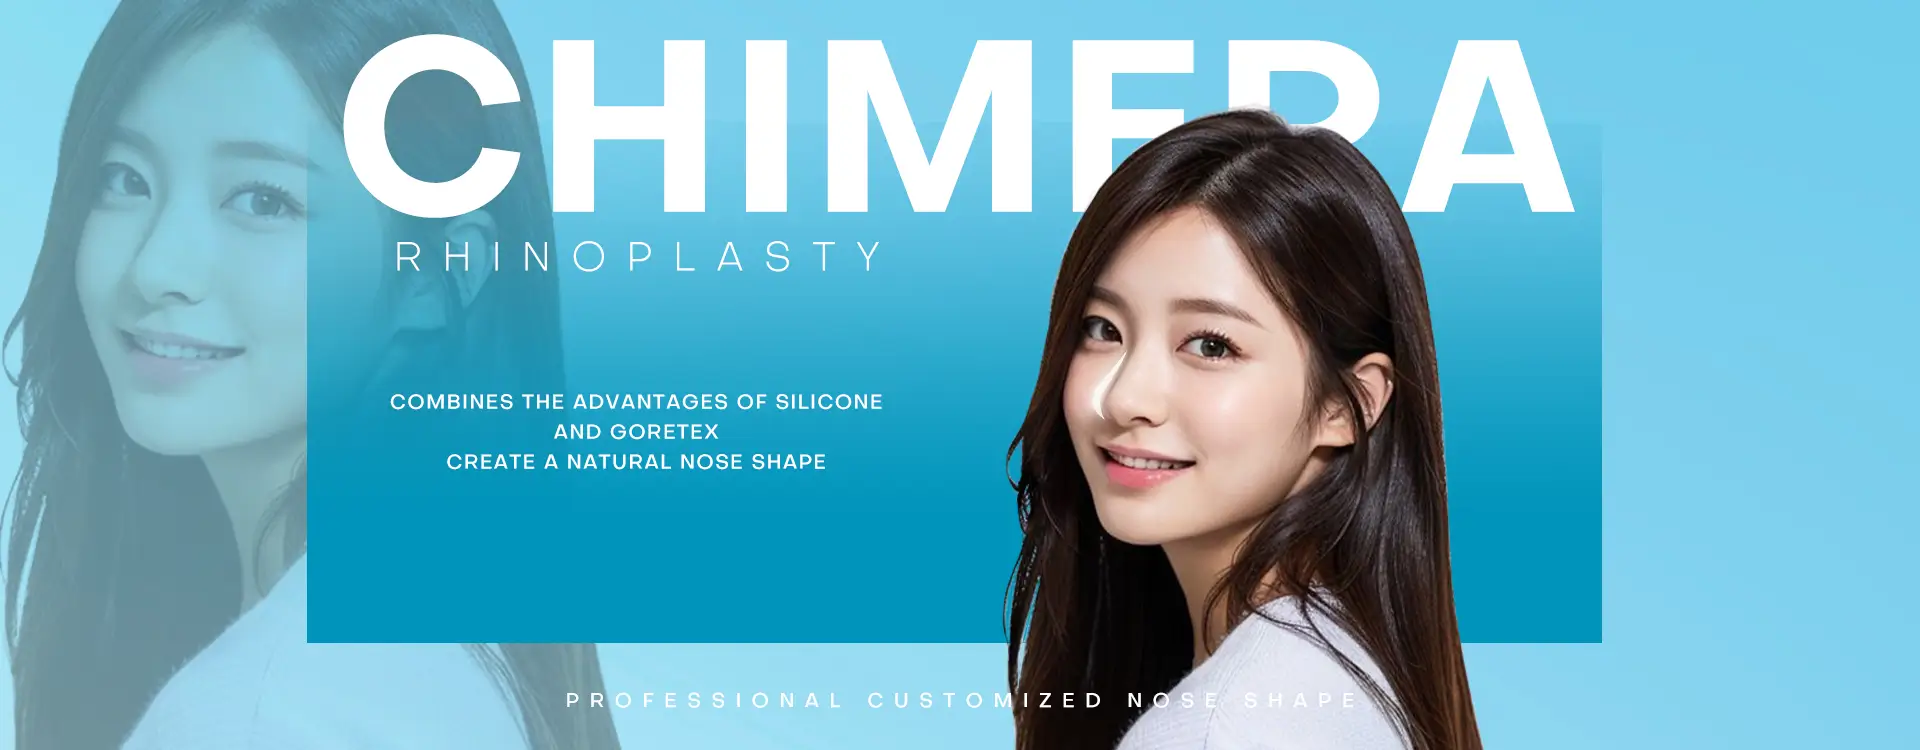 Chimera Rhinoplasty combines the advantages of silicone and Goretex to create a natural nose shape